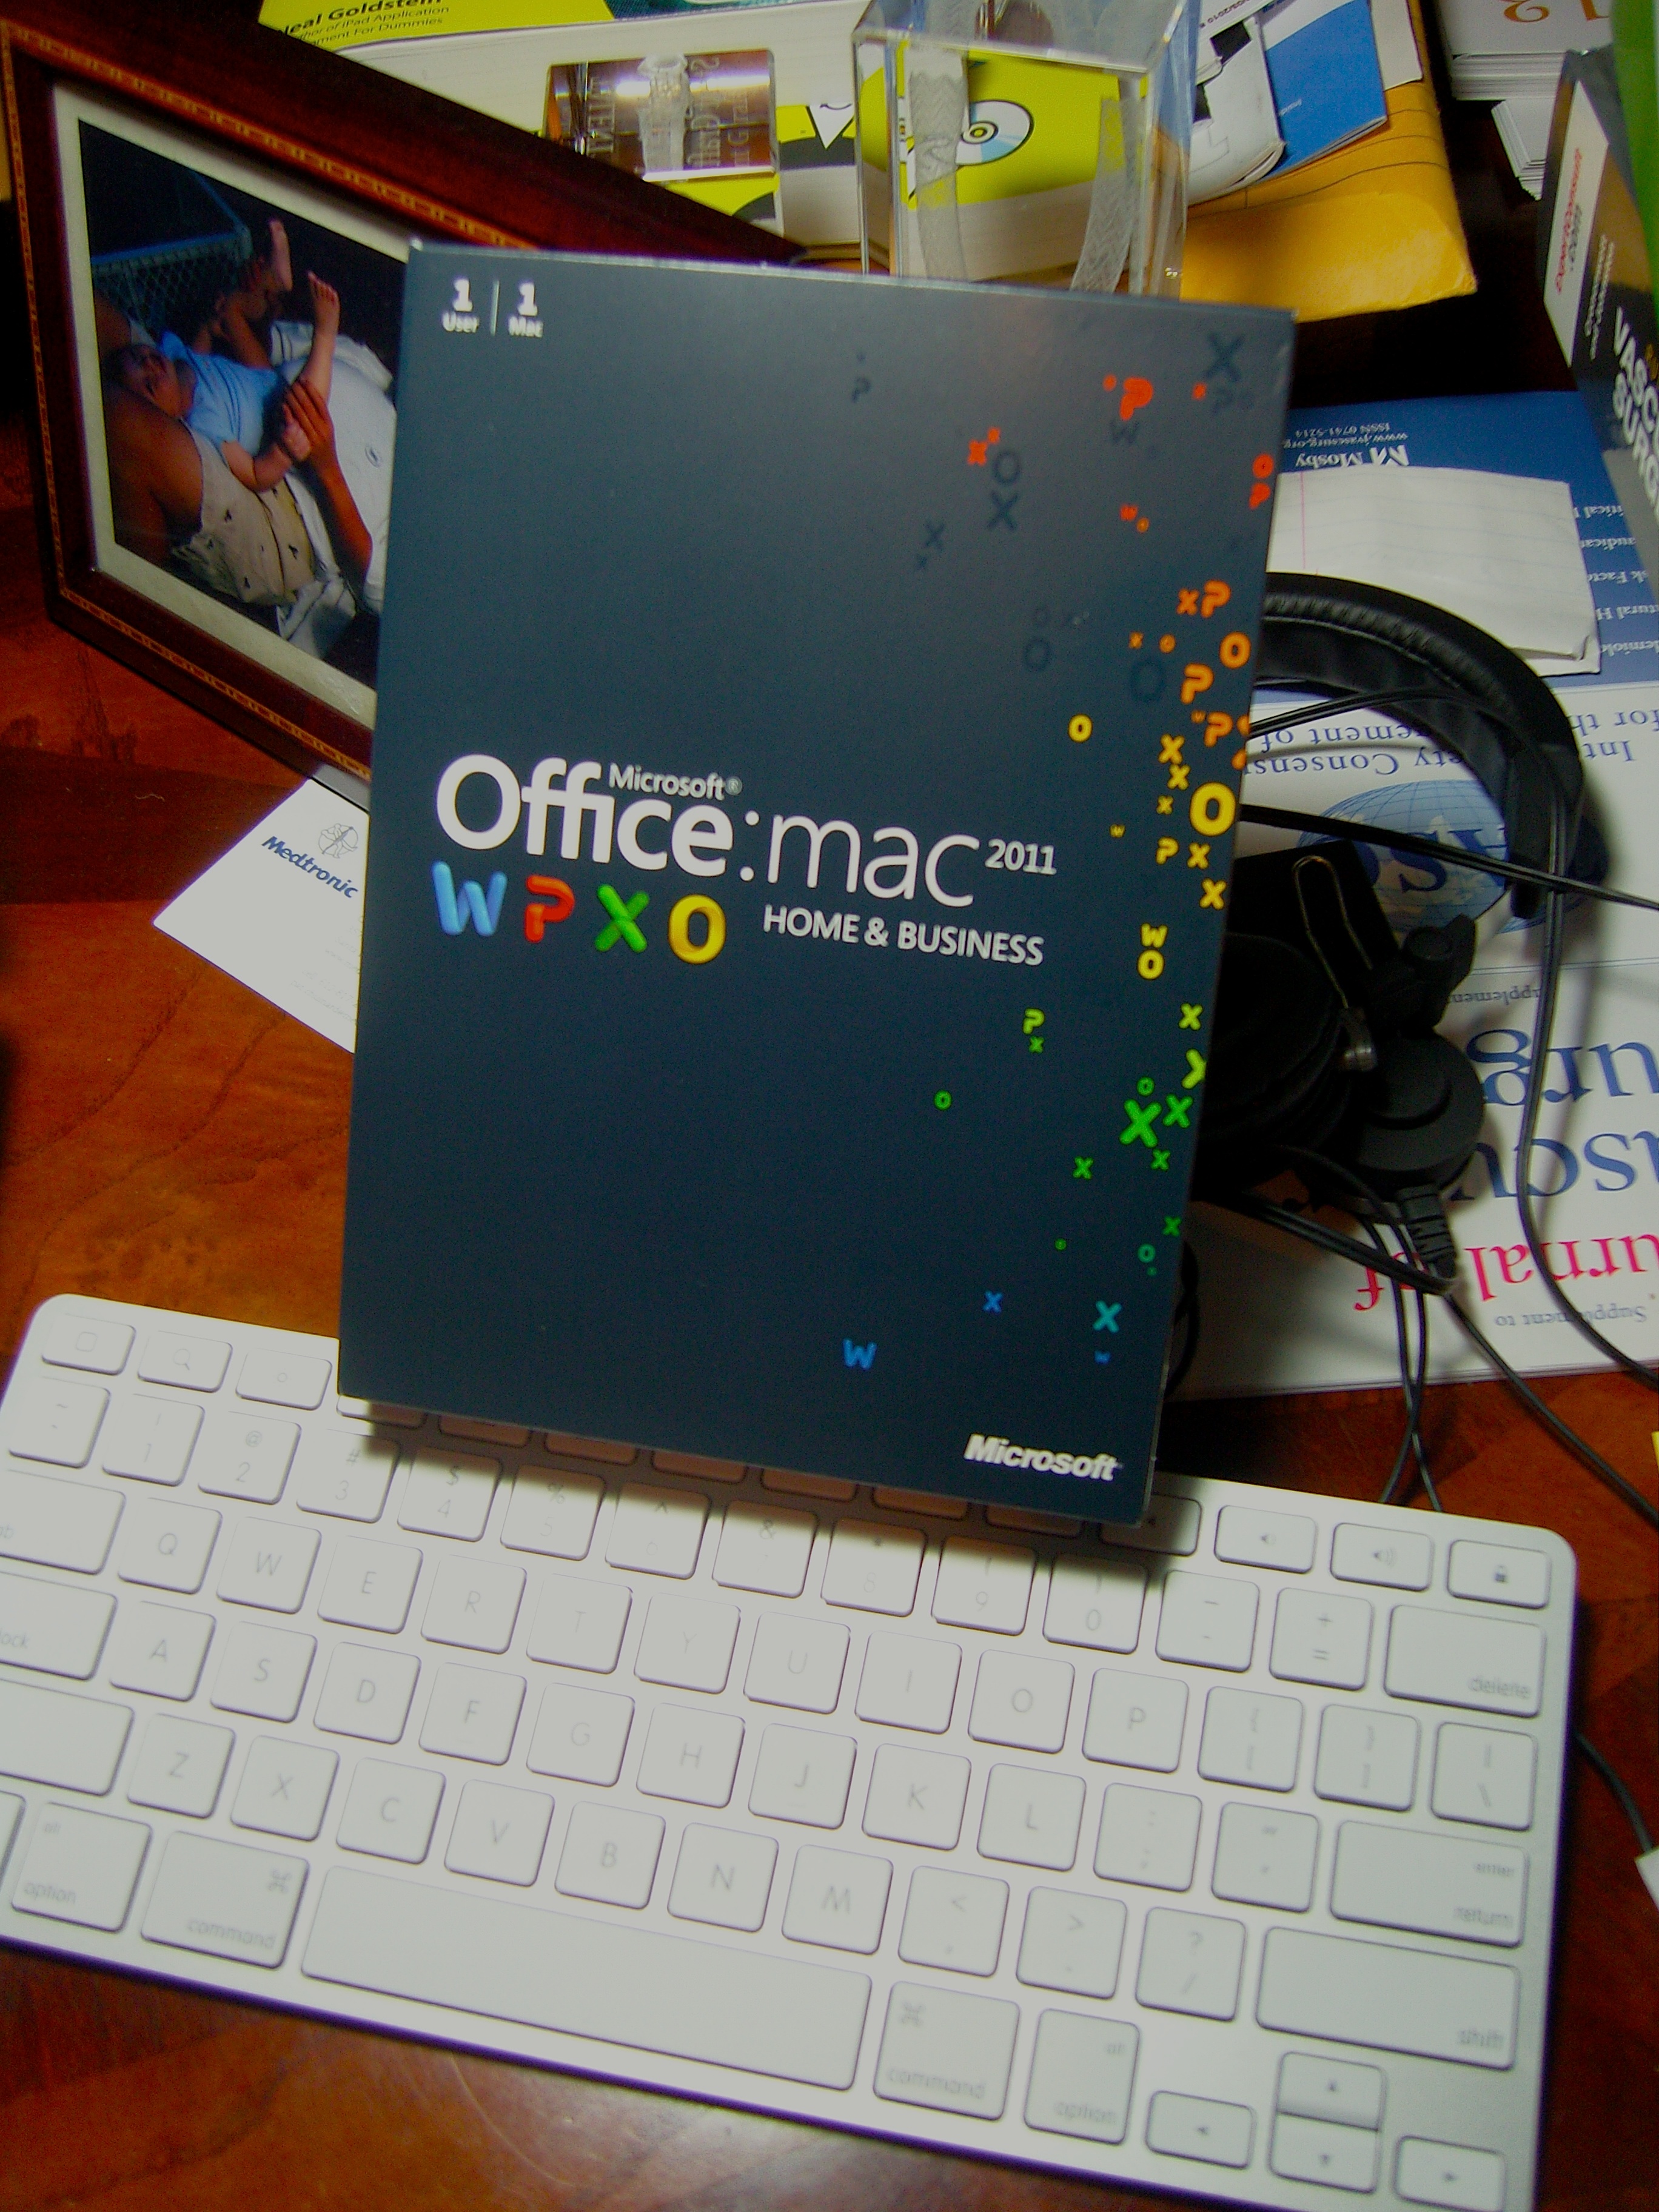 Ms office 2011 for mac update